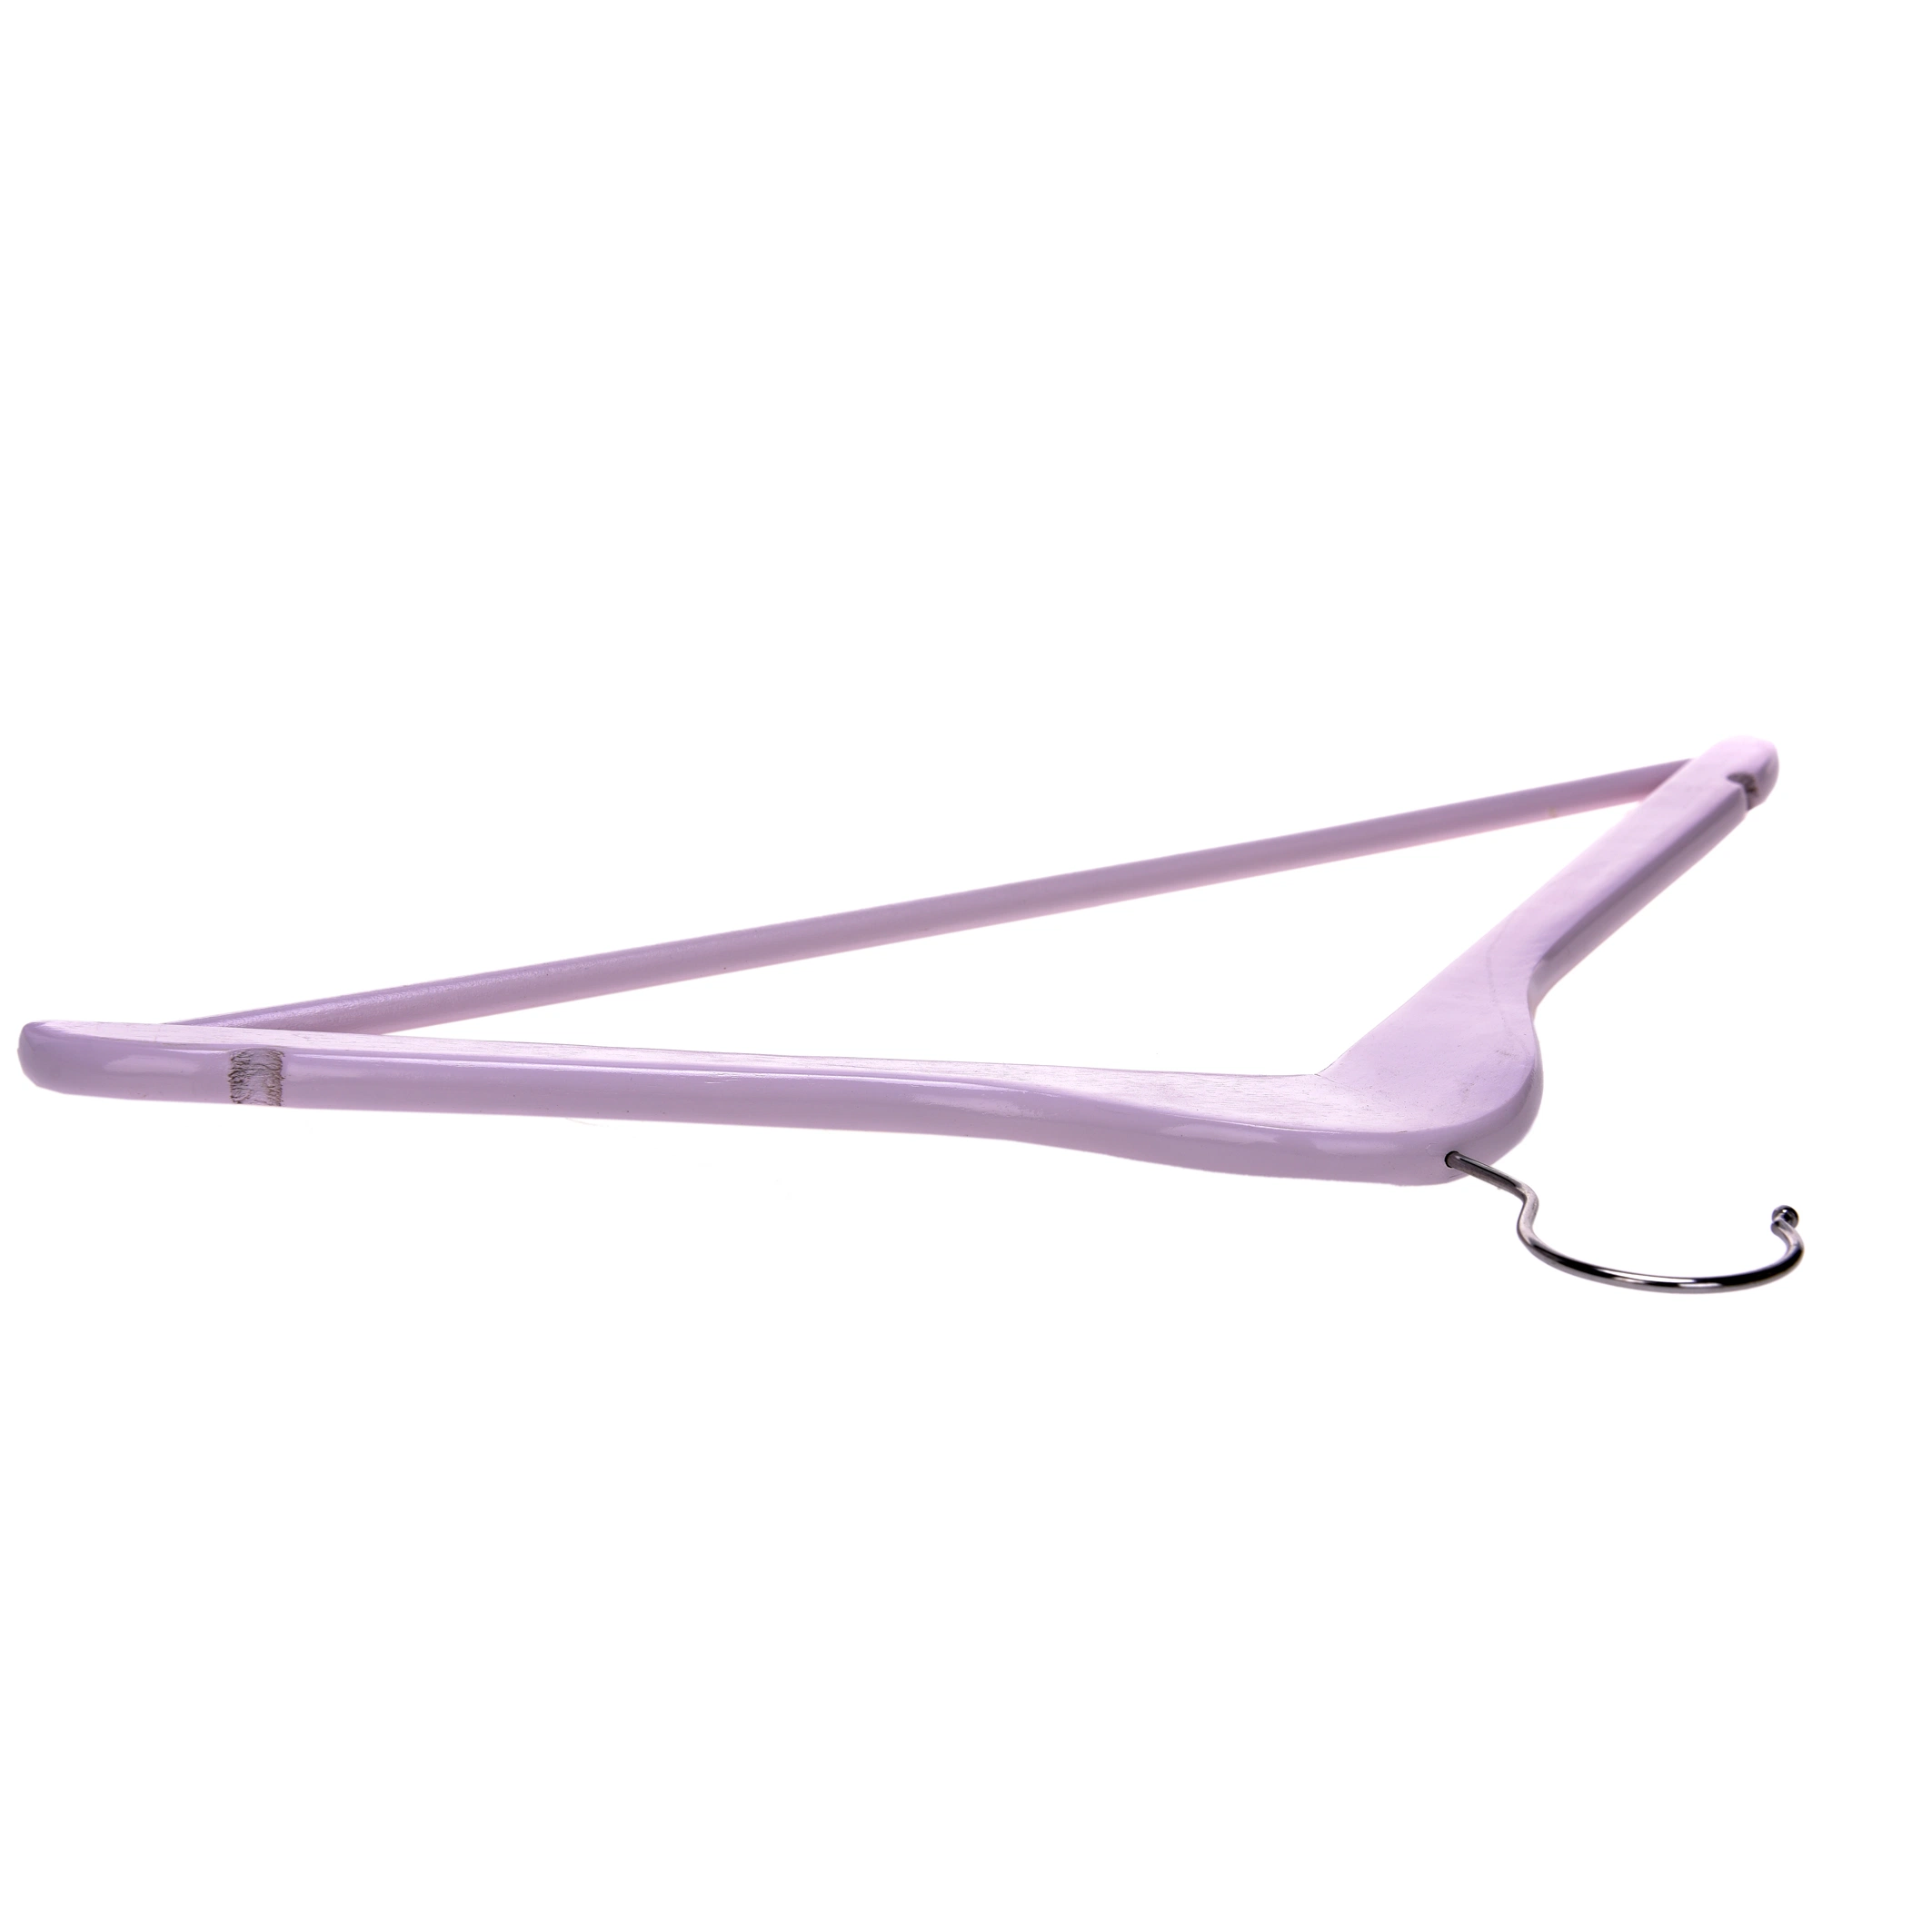 Commonly Wooden Hanger Environmental Products Laundry Coat Clothes Rack Basic Cloth Hanger for Clothes